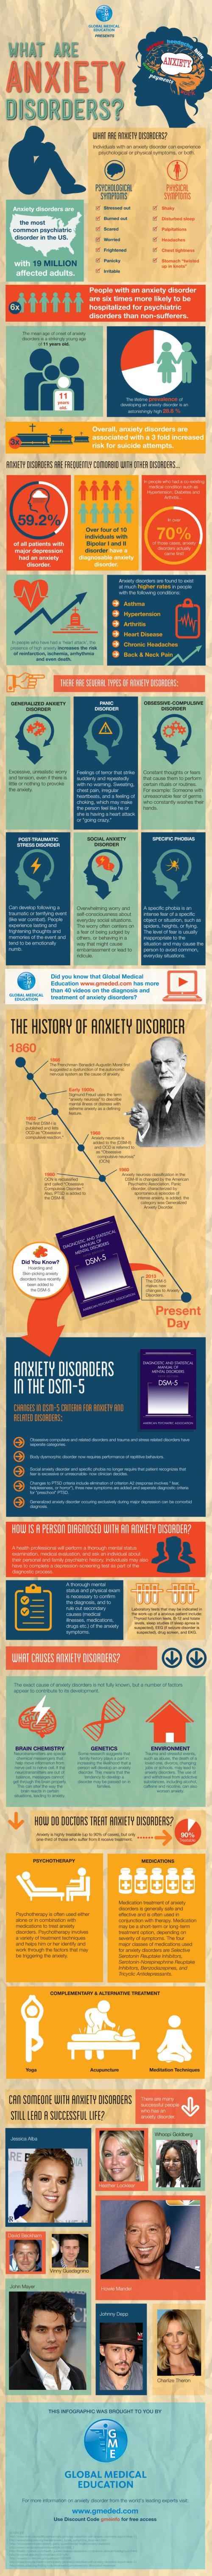 What Are Anxiety Disorders? infographic